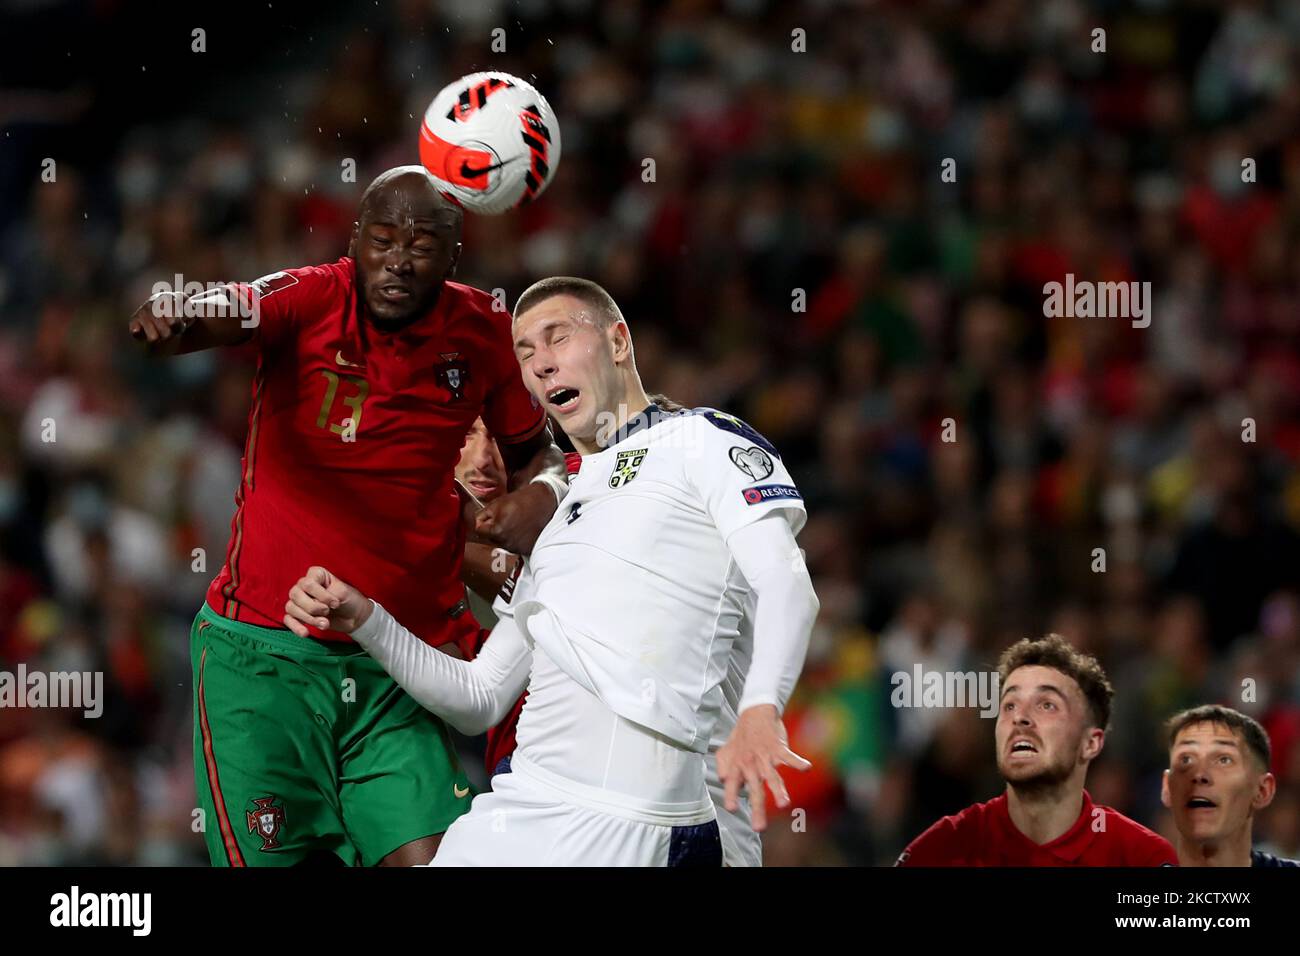 Portugal's midfielder Danilo (L) vies with Serbia's defender Strahinja Pavlovic during the FIFA World Cup Qatar 2022 qualification group A football match between Portugal and Serbia at the Luz stadium in Lisbon, Portugal, on November 14, 2021. (Photo by Pedro FiÃºza/NurPhoto) Stock Photo